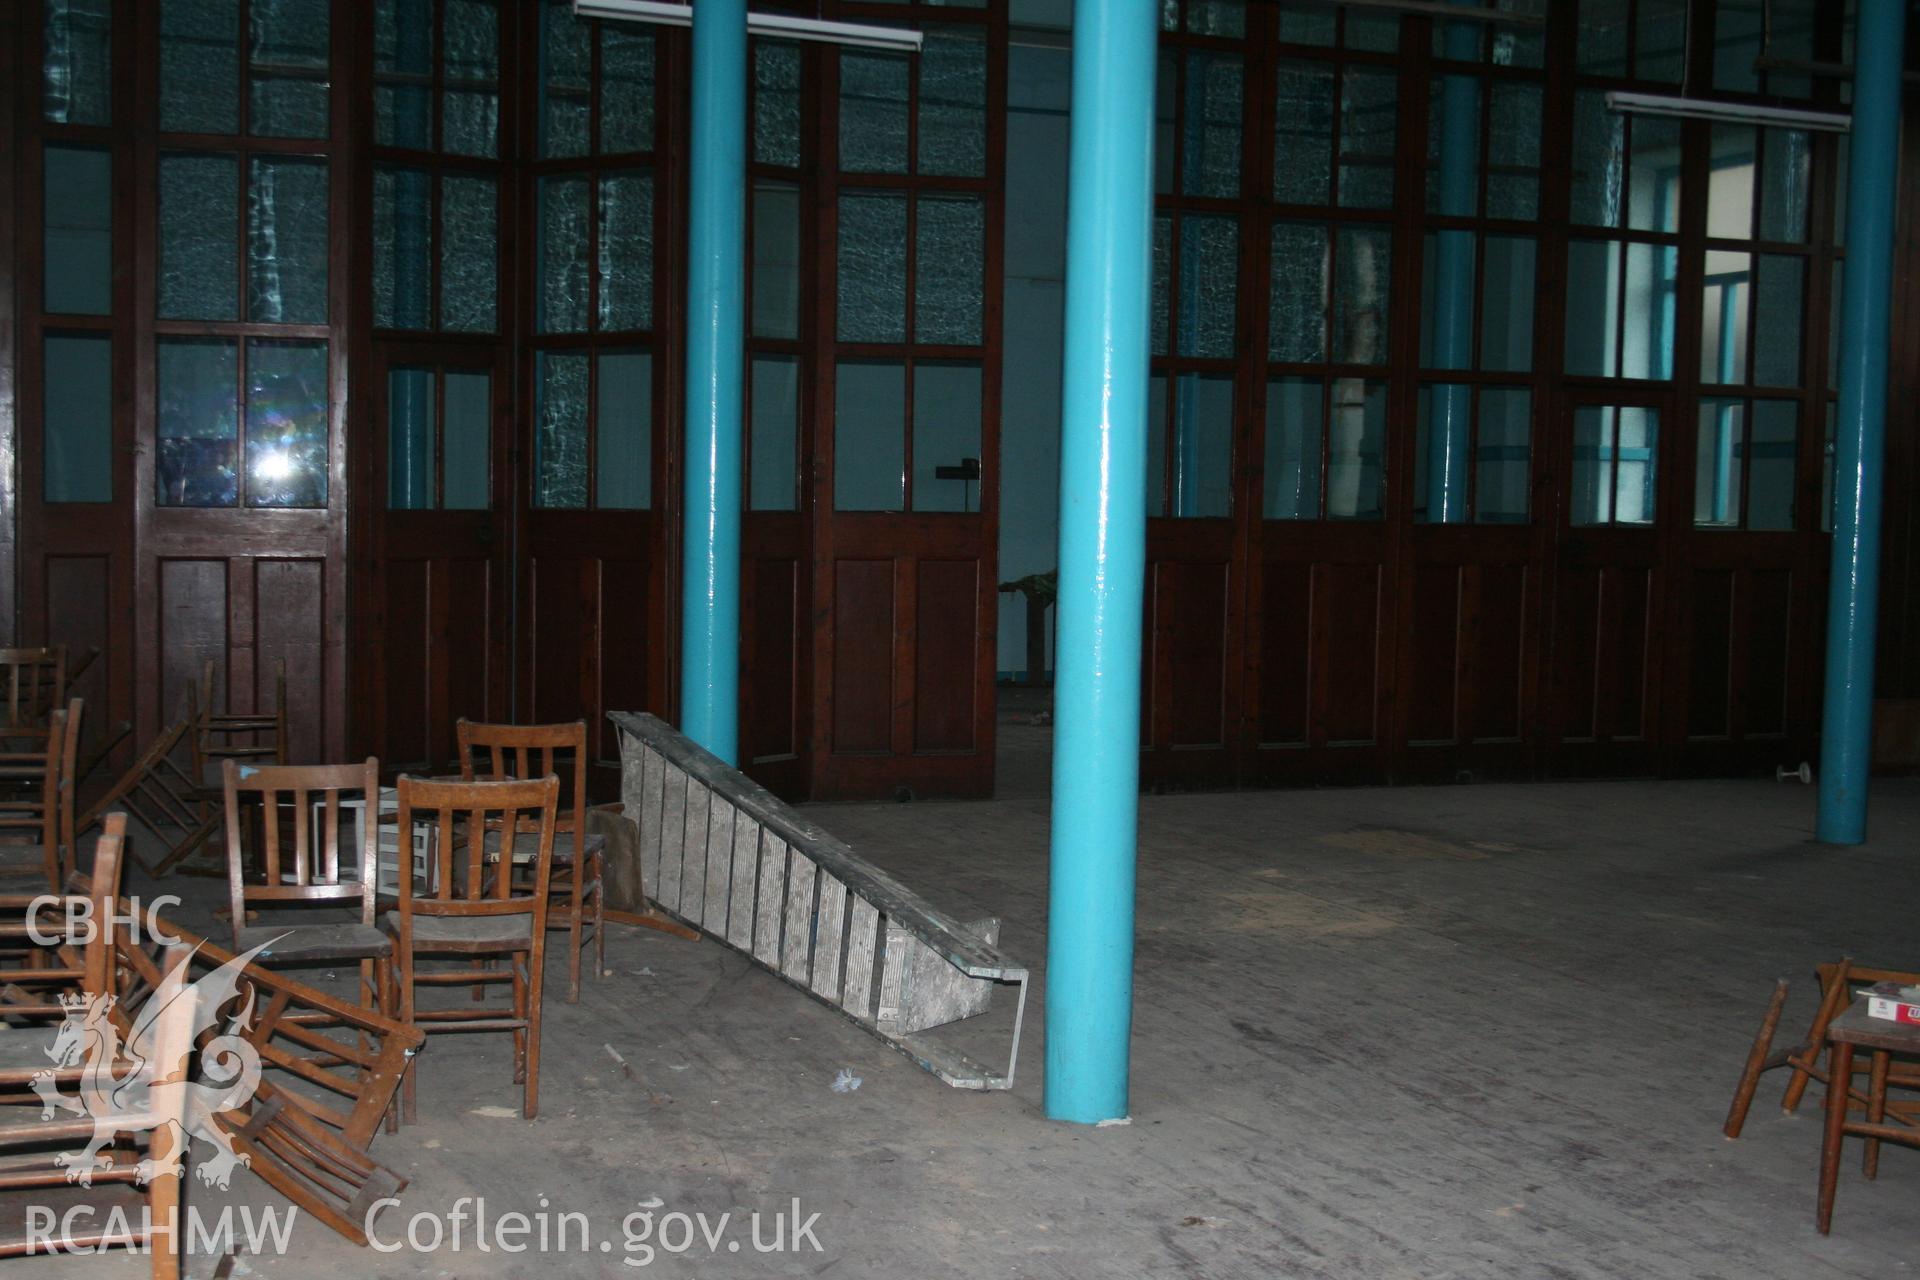 Hanbury Road baptist chapel, Bargoed, digital colour photograph showing interior - school room partition, received in the course of Emergency Recording case ref no RCS2/1/2247.